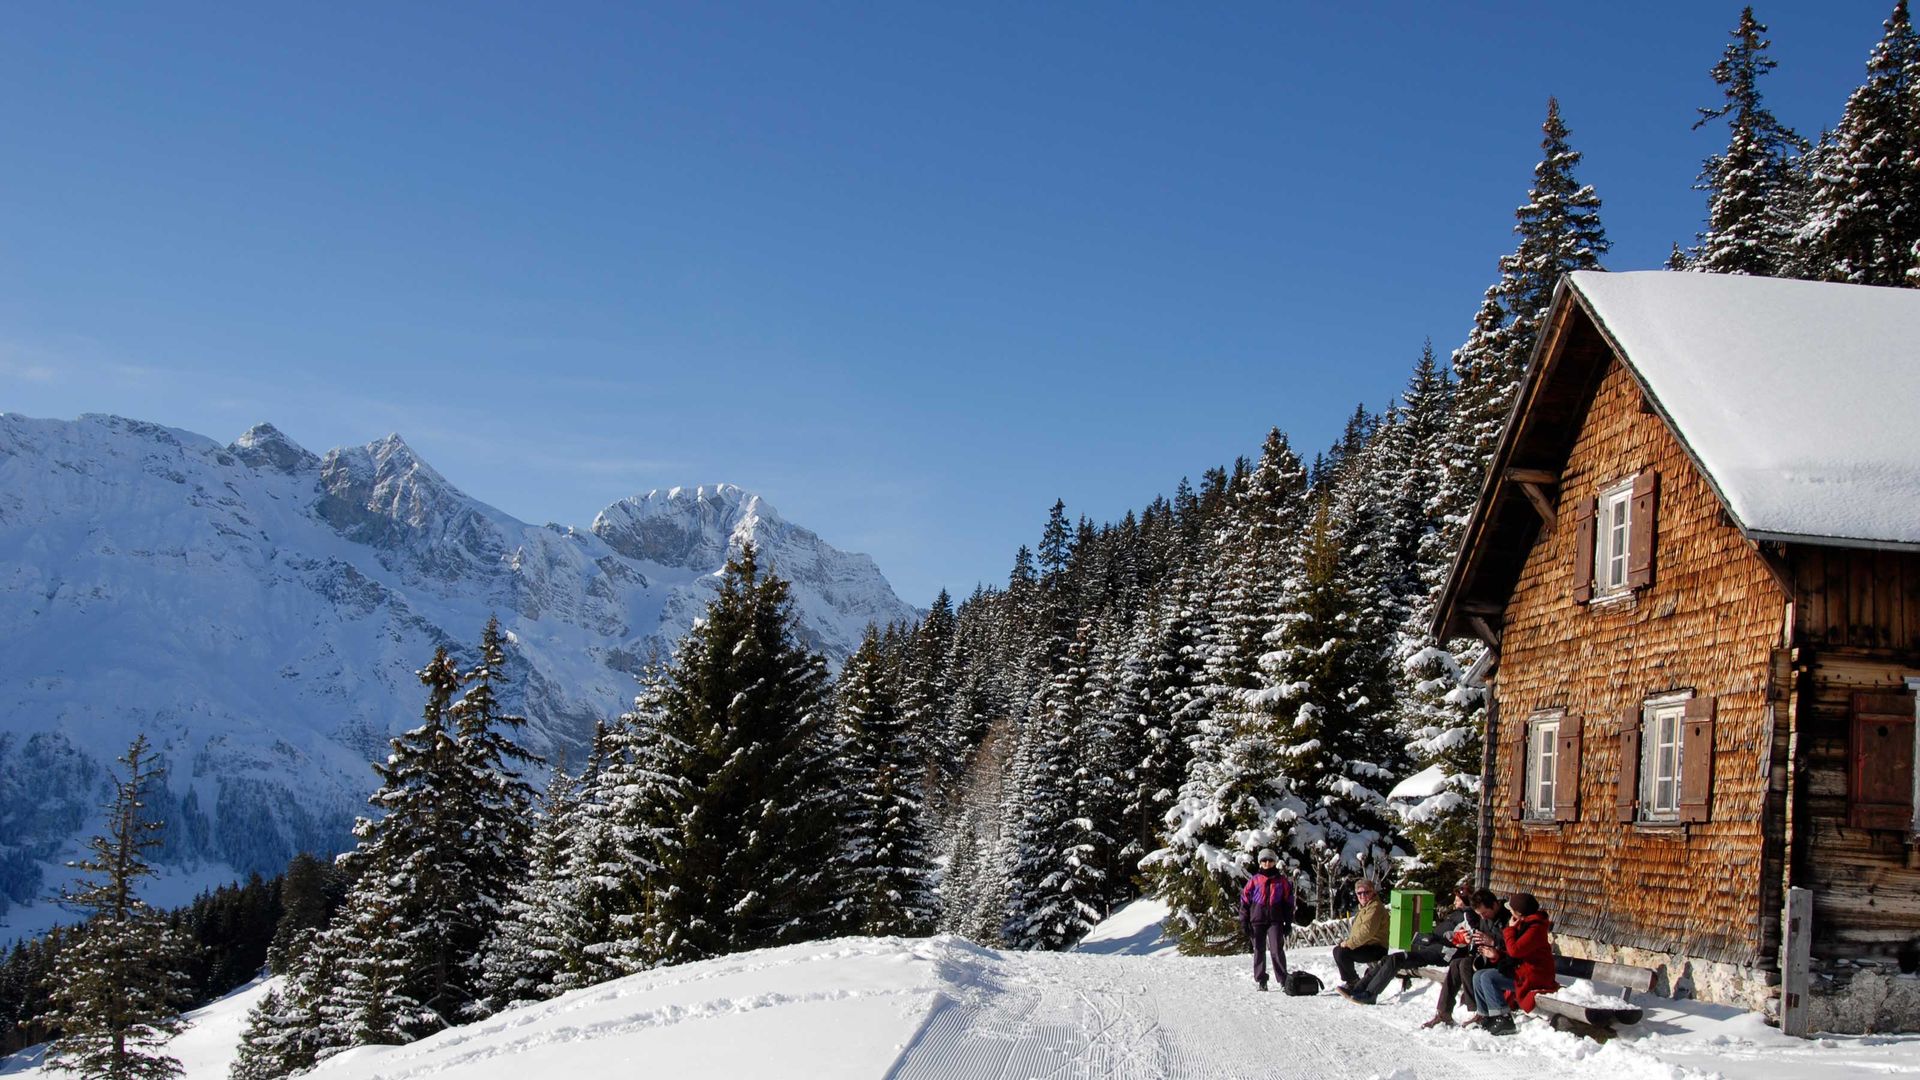 A group of winter hikers sit in front of a wooden hut and marvel at the view over the magnificent winter landscape on a sunny winter day.